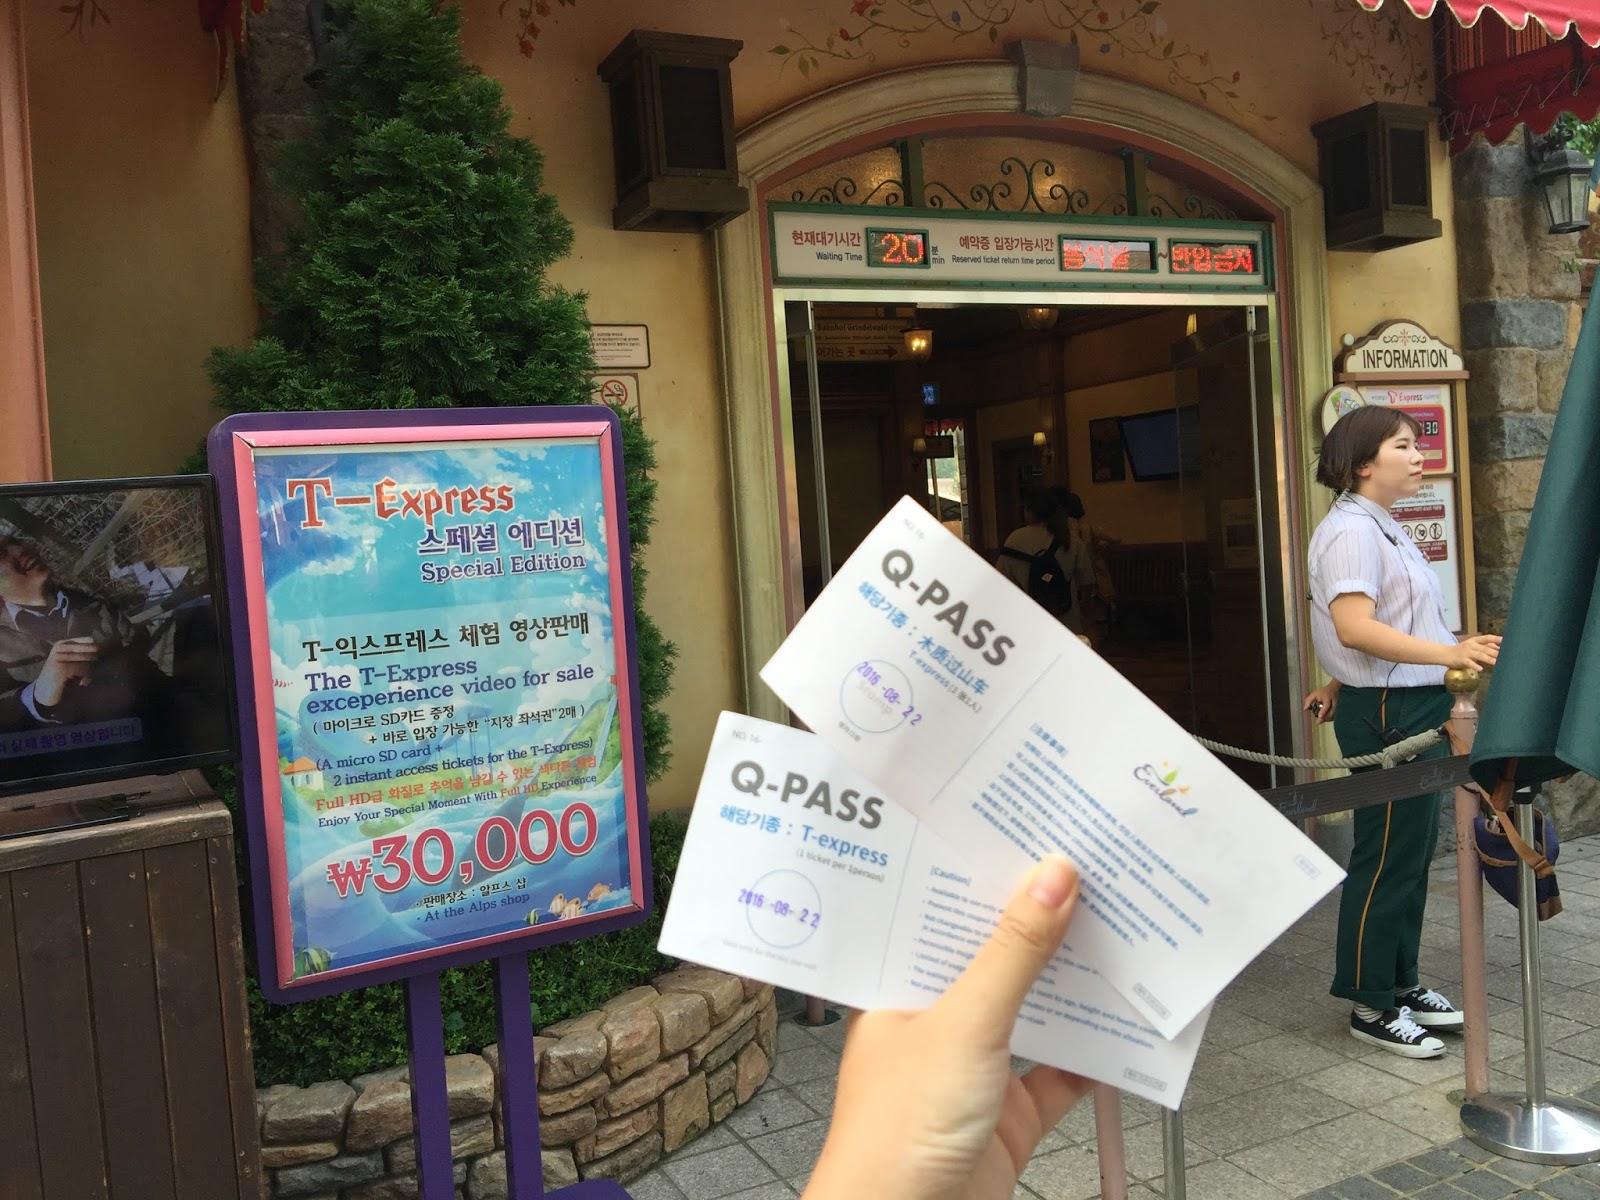 There are 4 different Q Pass available for all 4 popular rides in Everland.